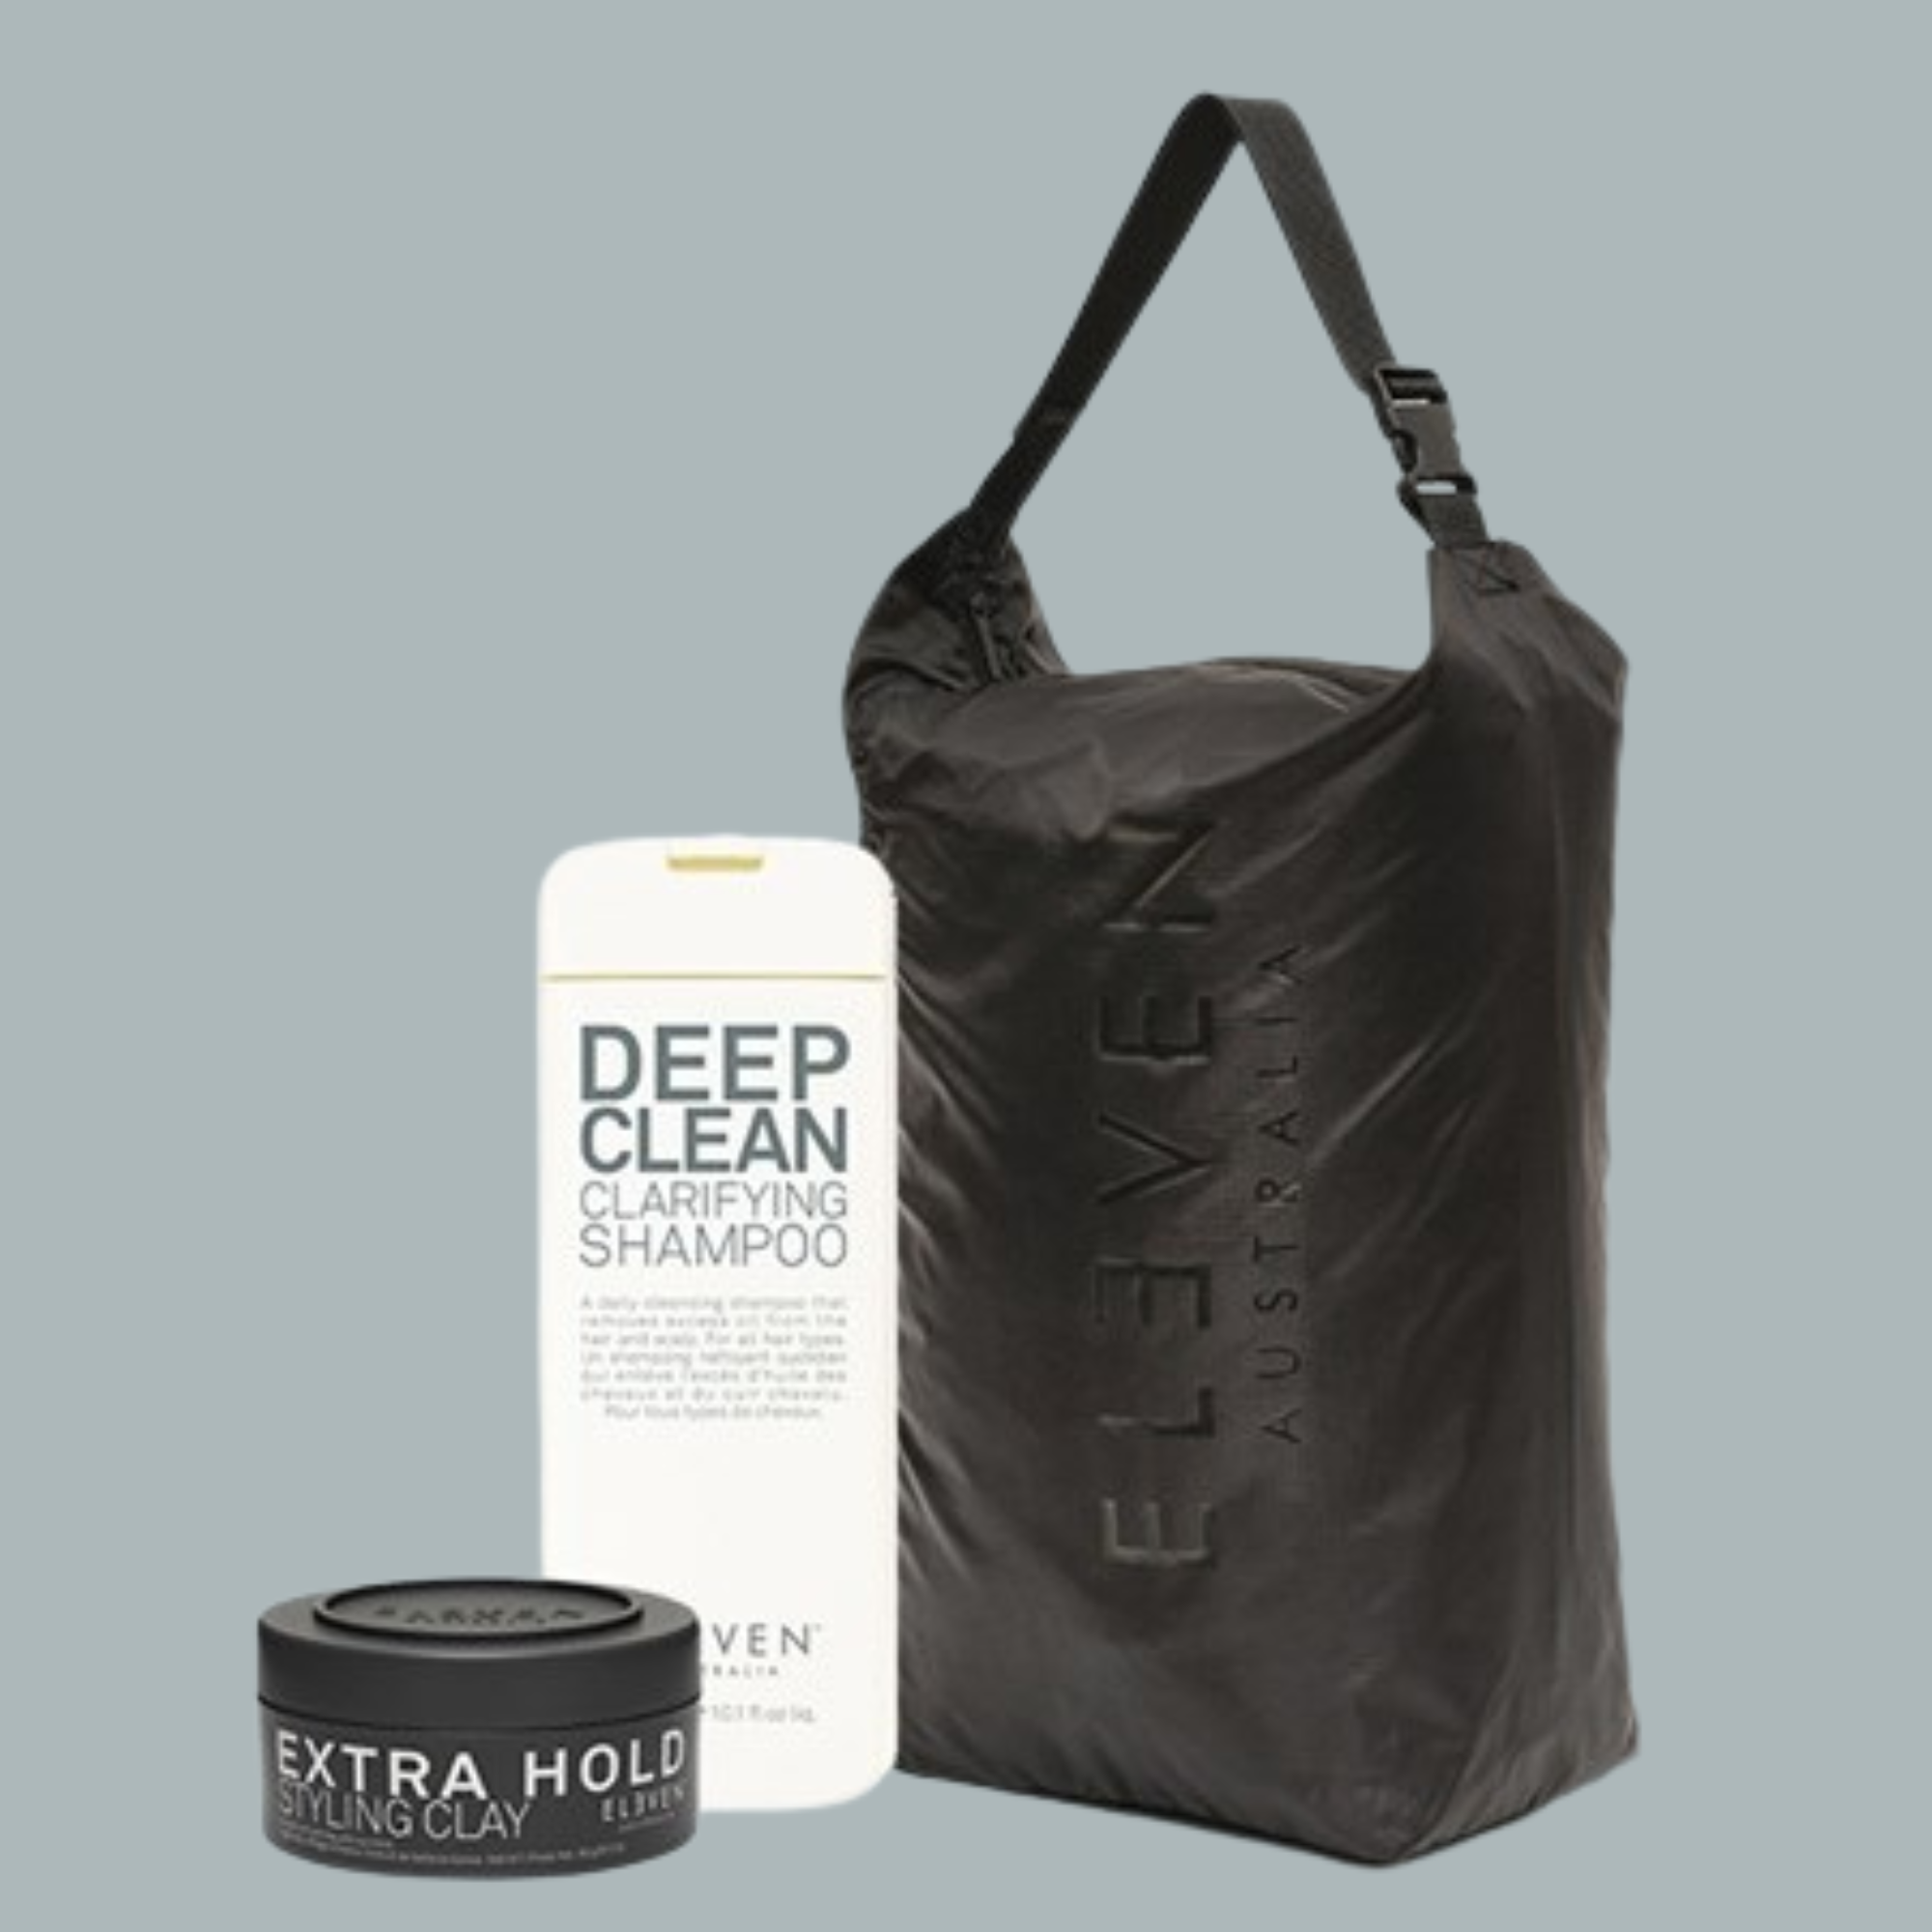 Eleven – Deep Clean Shampoo + Extra Hold Styling Clay